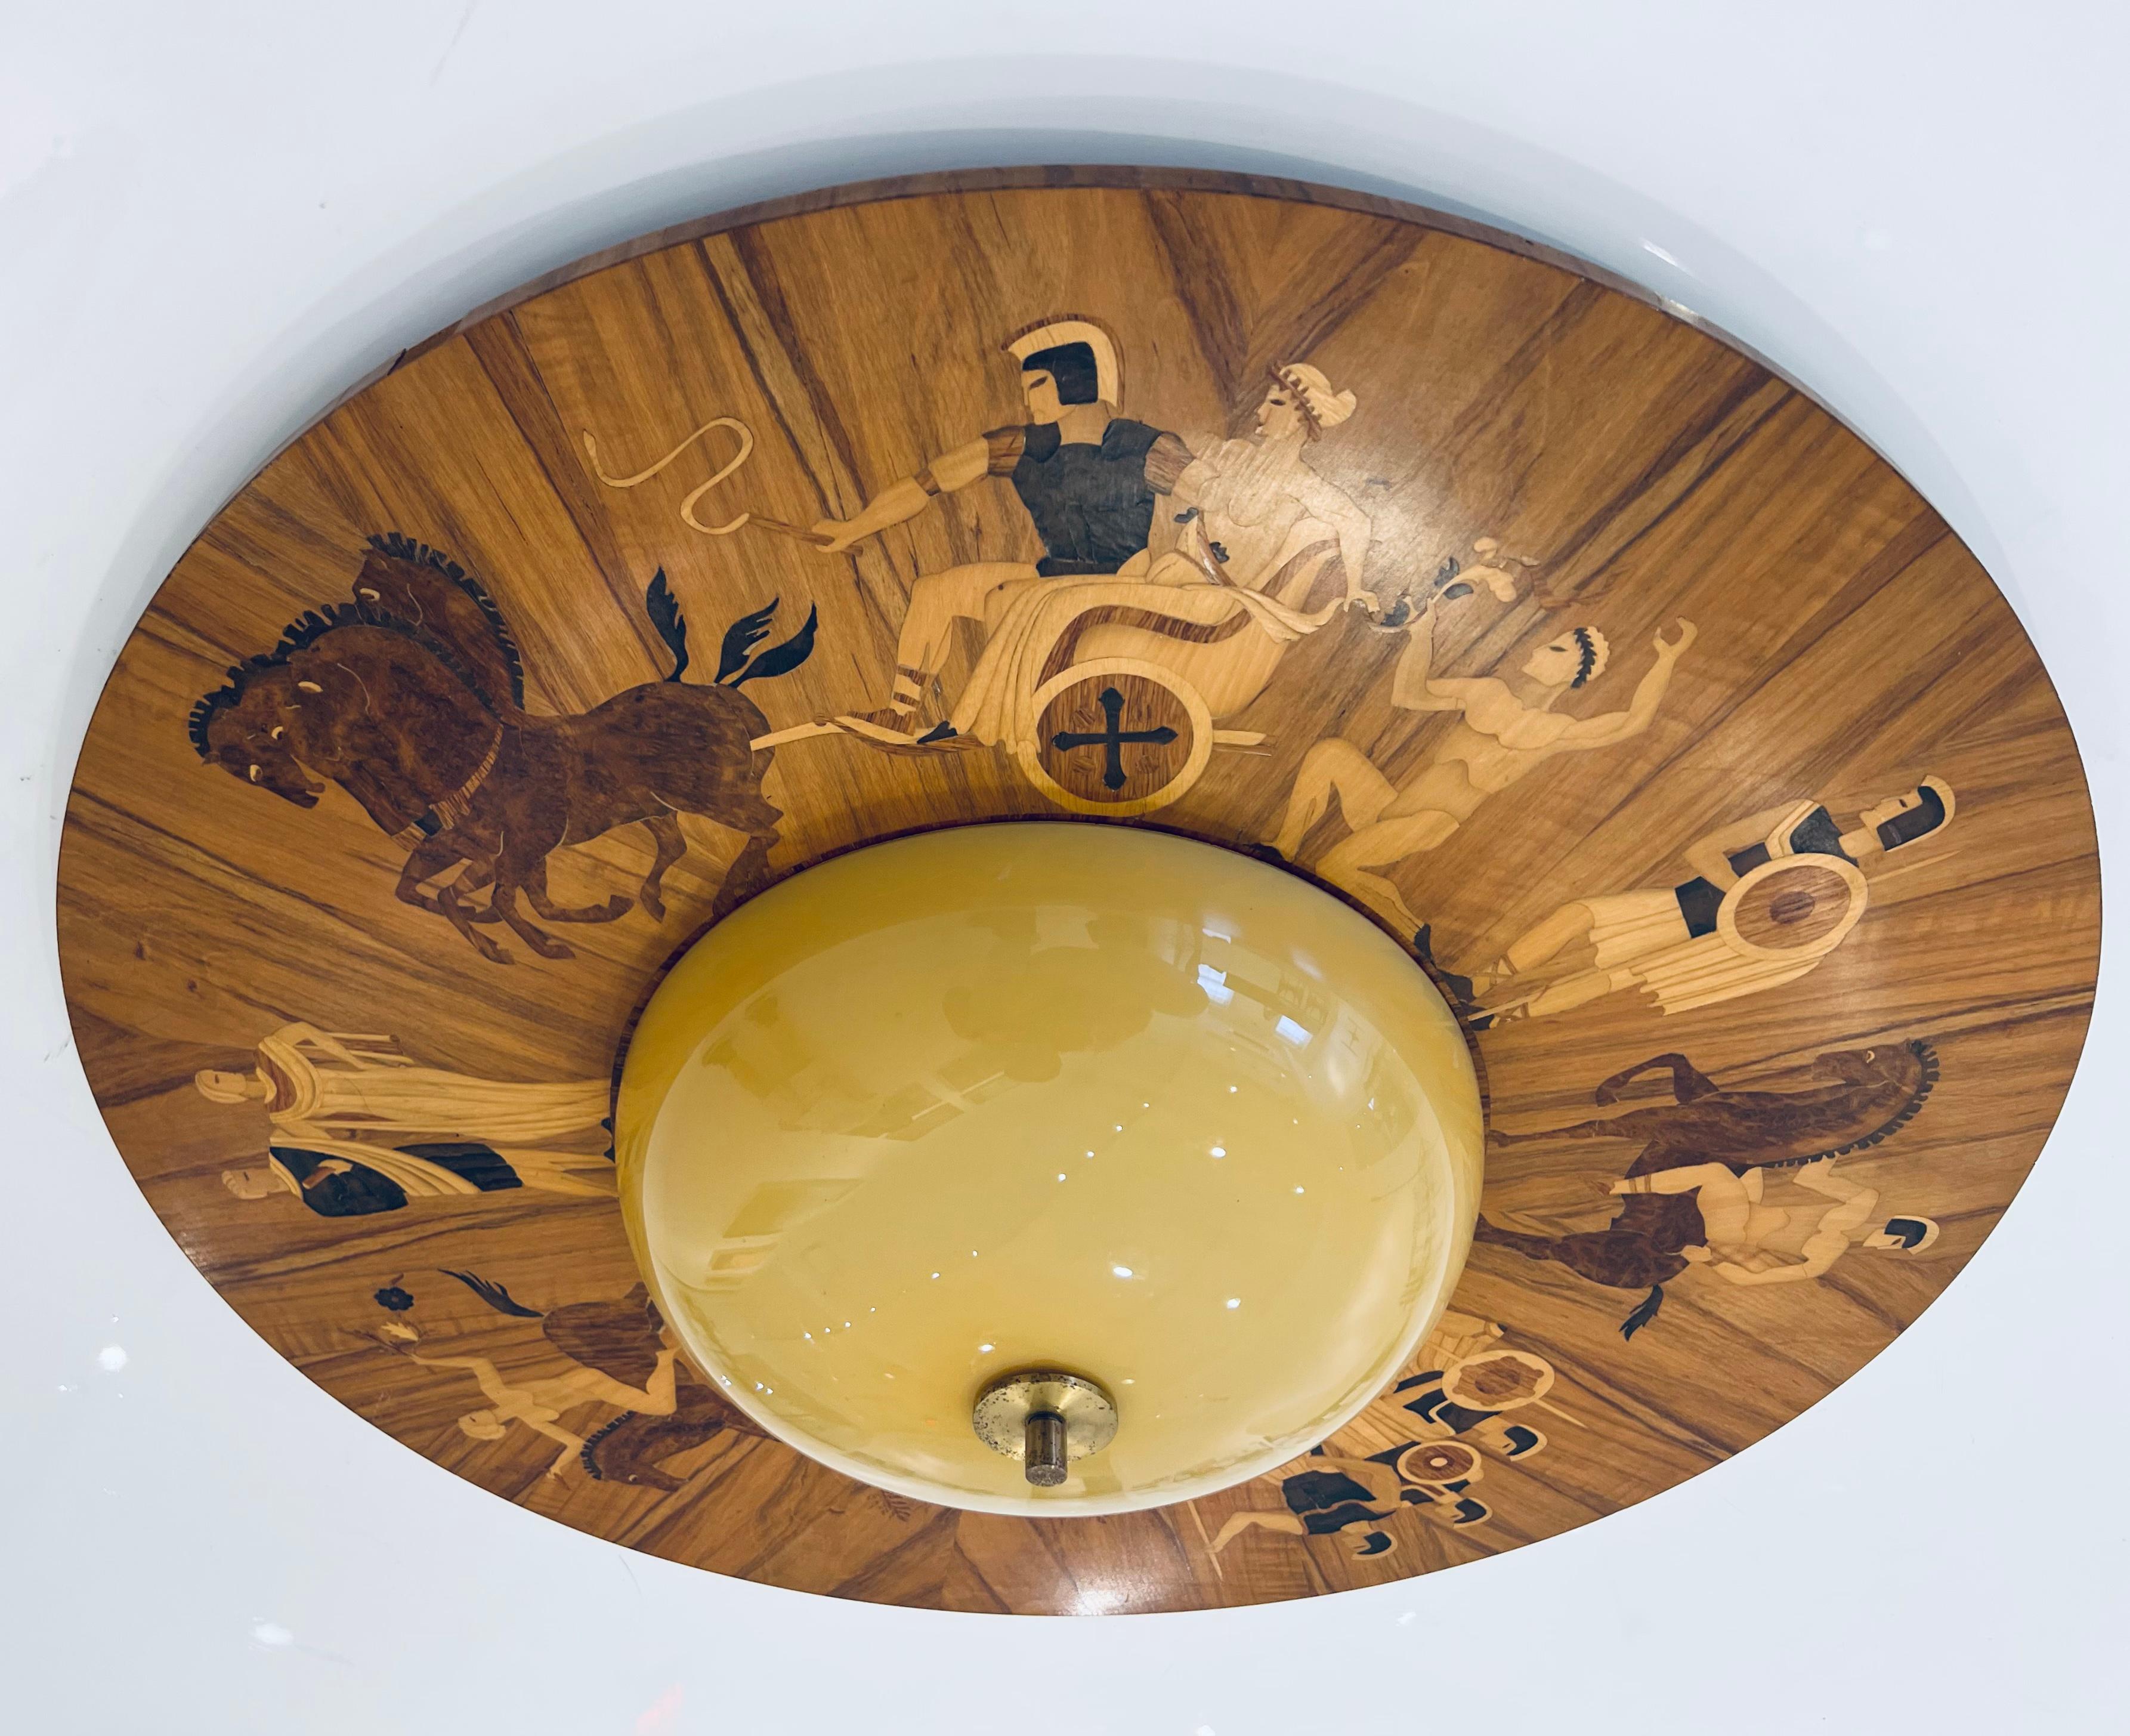 A rare 1920 Art Deco inlaid flush mount ceiling fixture by Birger Ekman for Mjolby Intarsia. The fixture has six standard base sockets. The inlaid wood portrays Roman scenes and has a large custard dome glass shade with aged brass finial. Rewired.